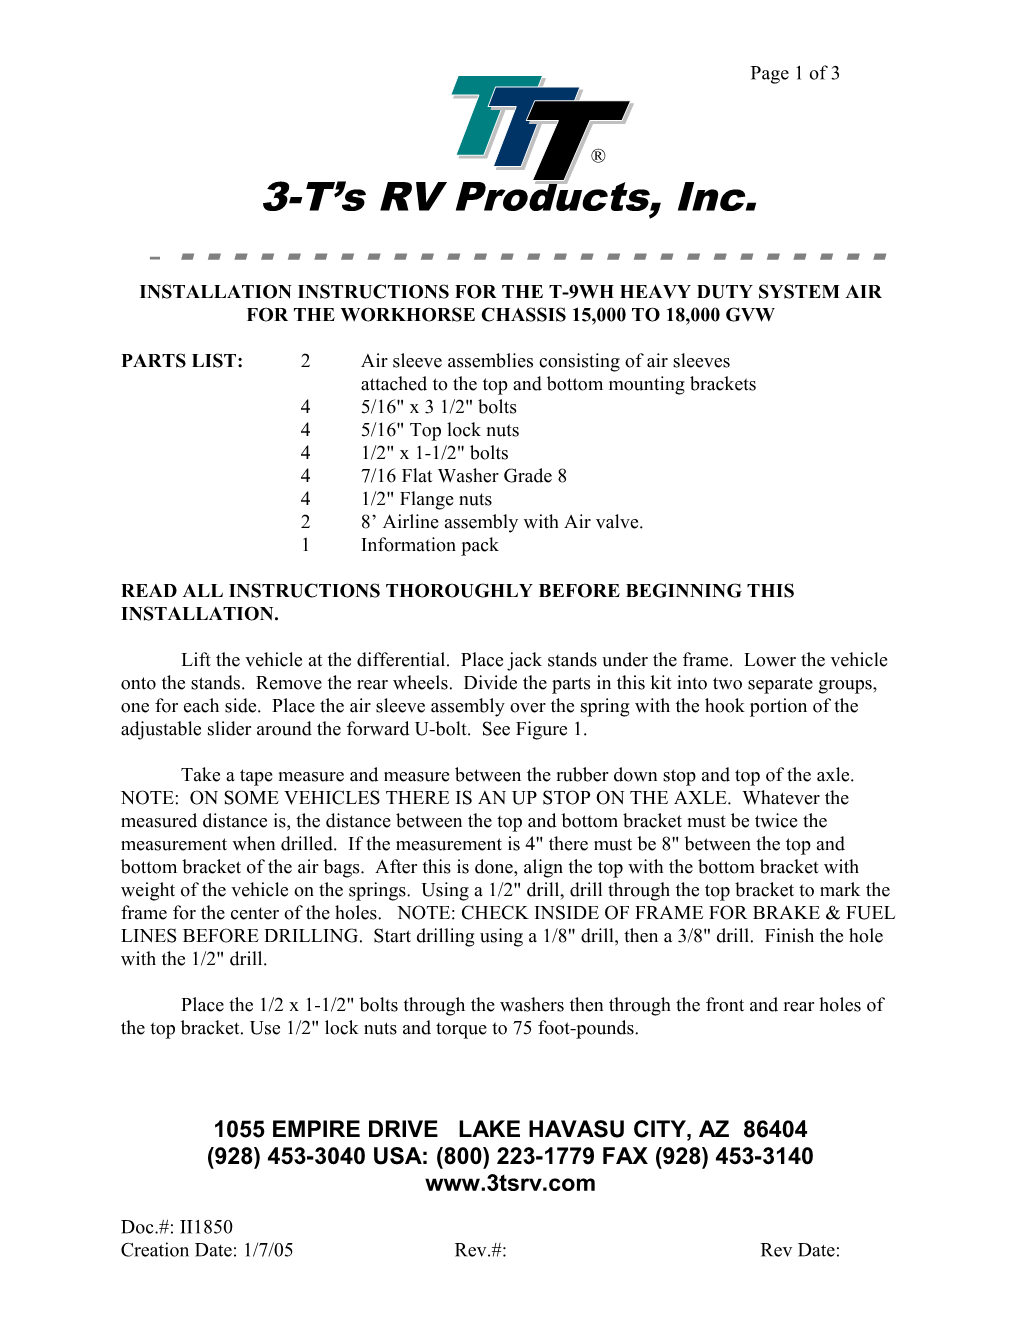 Installation Instructions for the T-9Wh Heavy Duty System Air for the Workhorse Chassis